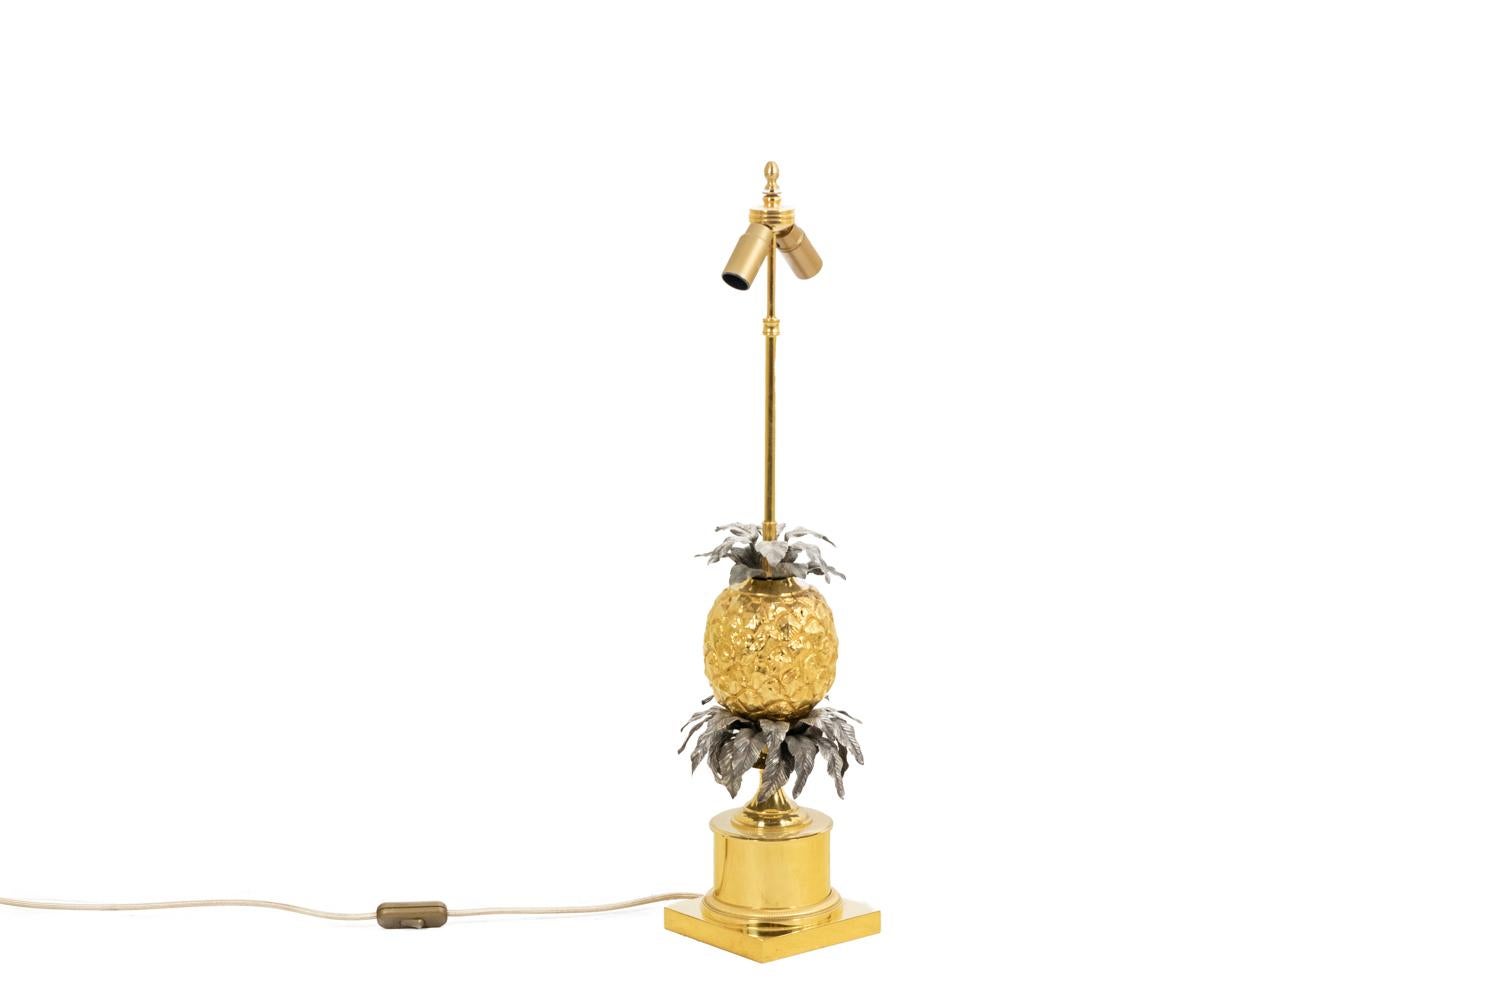 Maison Charles, by.

Large lamp representing a stylized pineapple in gold-plated bronze and crowned by leaves in embossed and gilt brass. Under the pineapple, the tree is symbolized by a more important triple crown of leaves in gilt brass. The whole